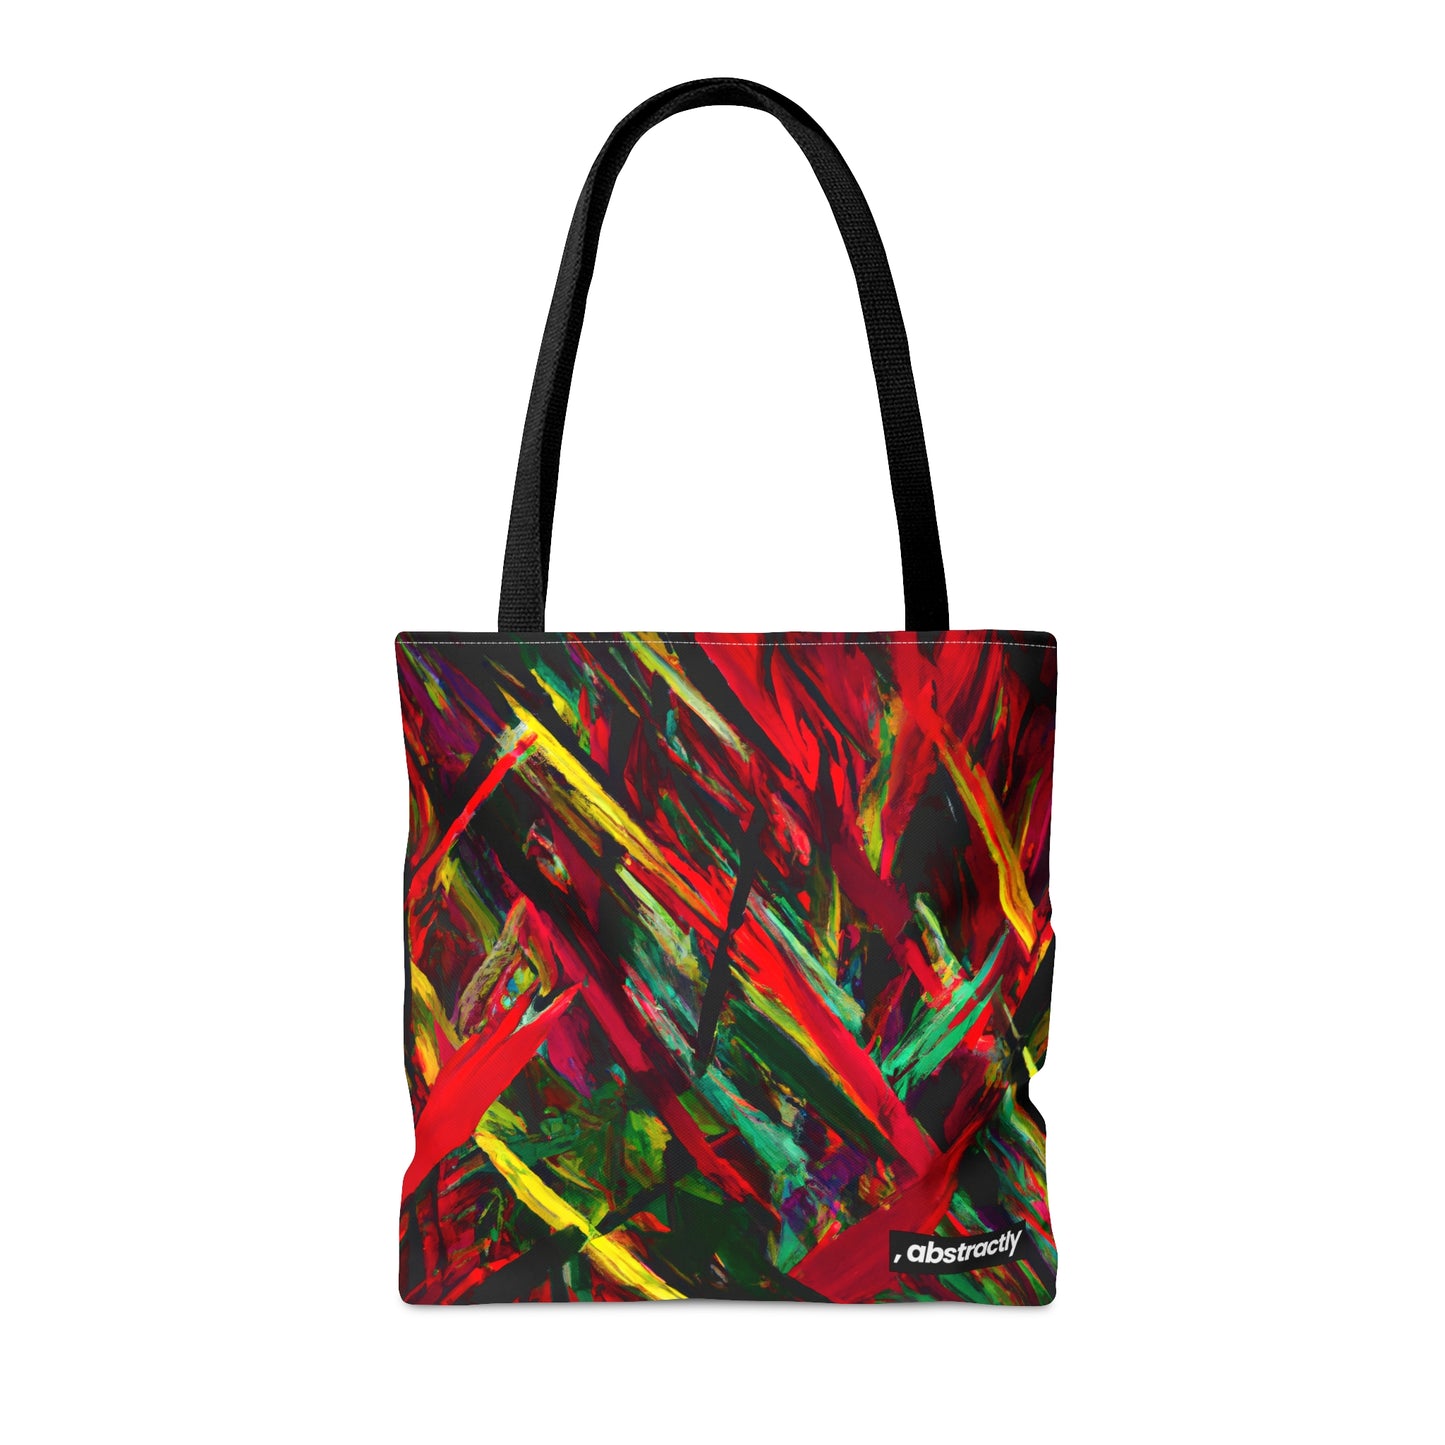 Jack Marcus - Electric Force, Abstractly - Tote